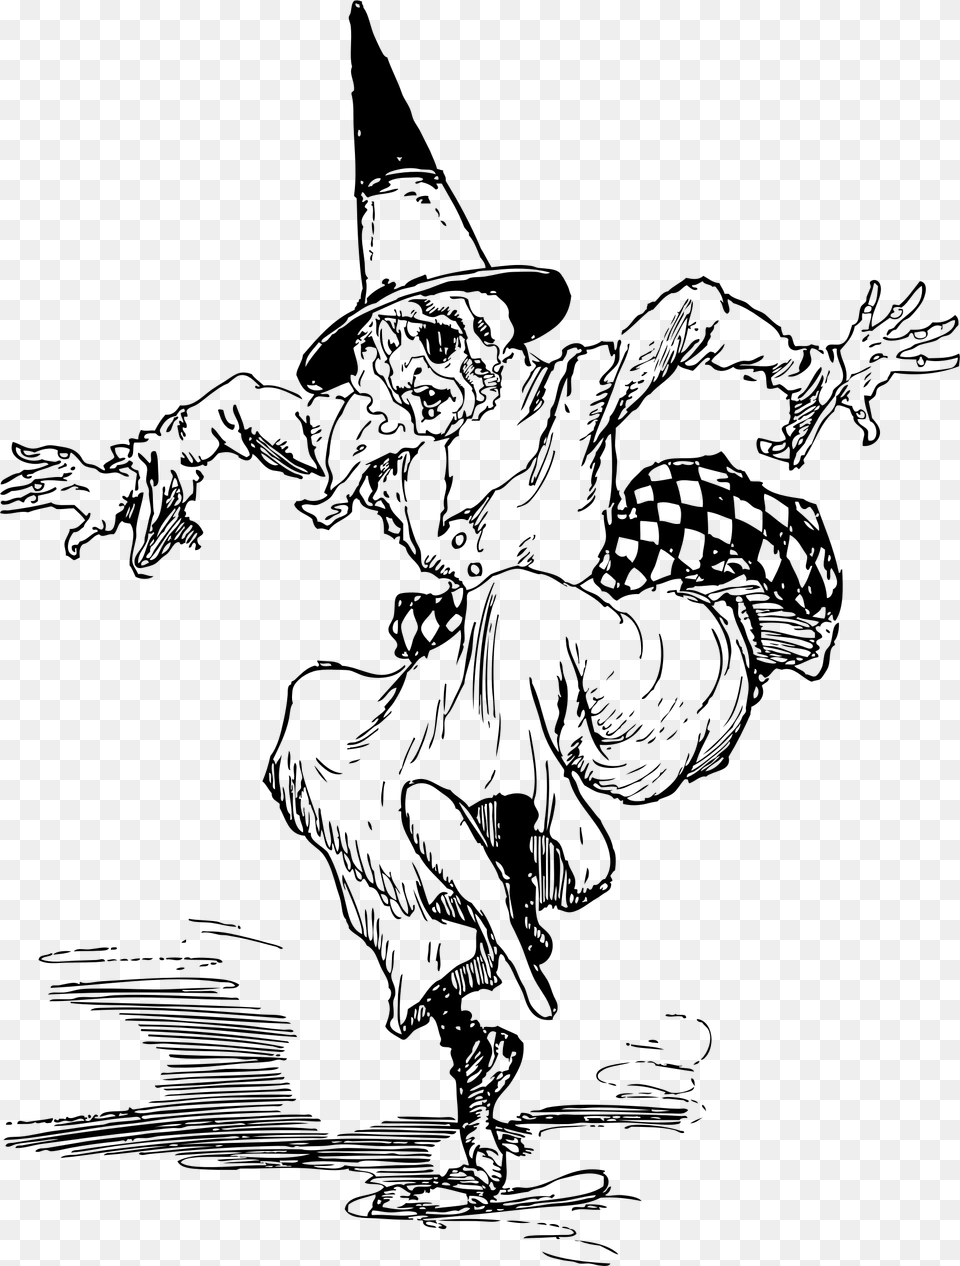 Wicked Witch Of The West The Wizard Wicked Witch Of Wicked Witch Of The West Illustration, Gray Png